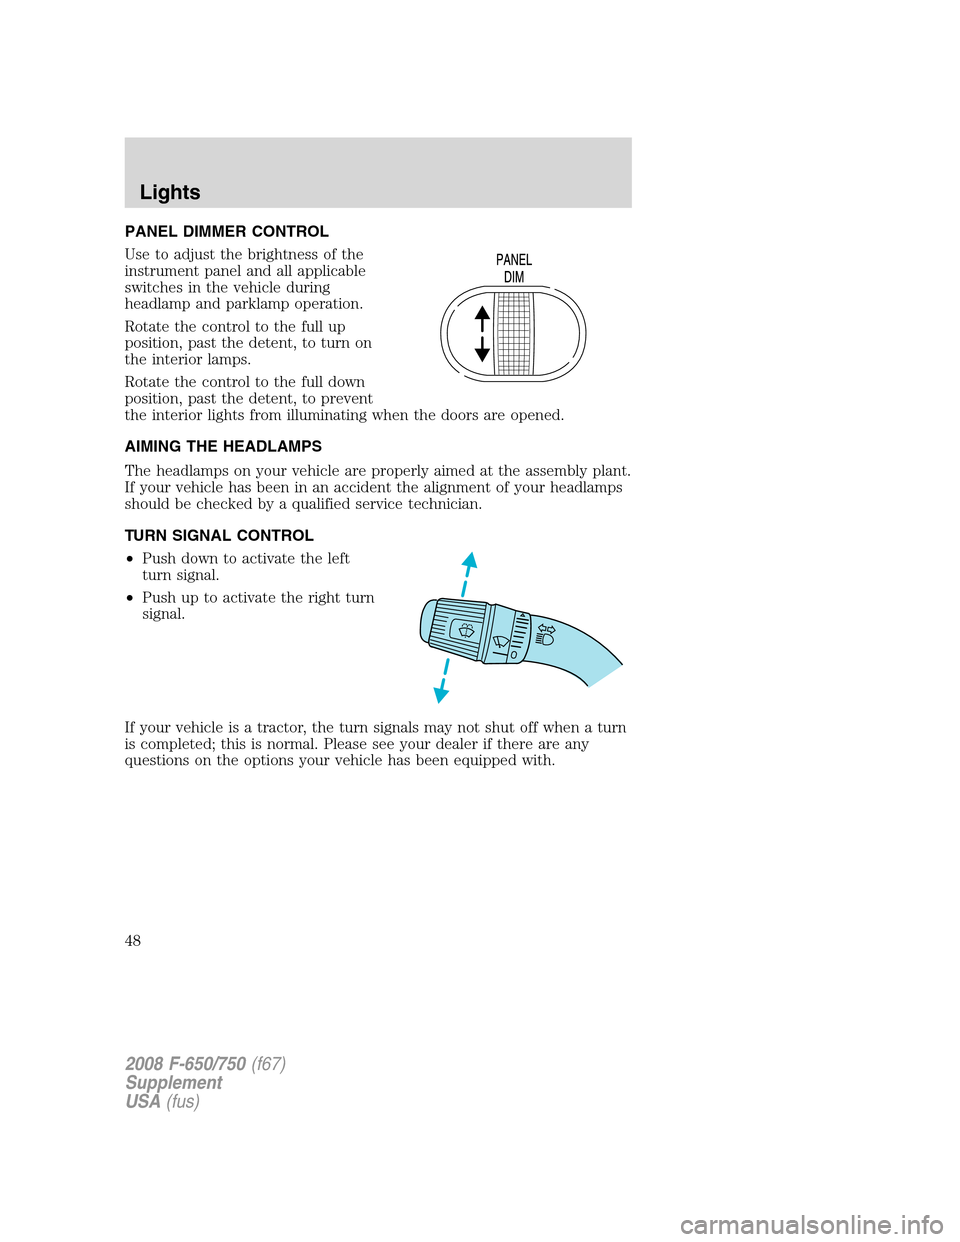 FORD F750 2008 11.G Owners Manual PANEL DIMMER CONTROL
Use to adjust the brightness of the
instrument panel and all applicable
switches in the vehicle during
headlamp and parklamp operation.
Rotate the control to the full up
position,